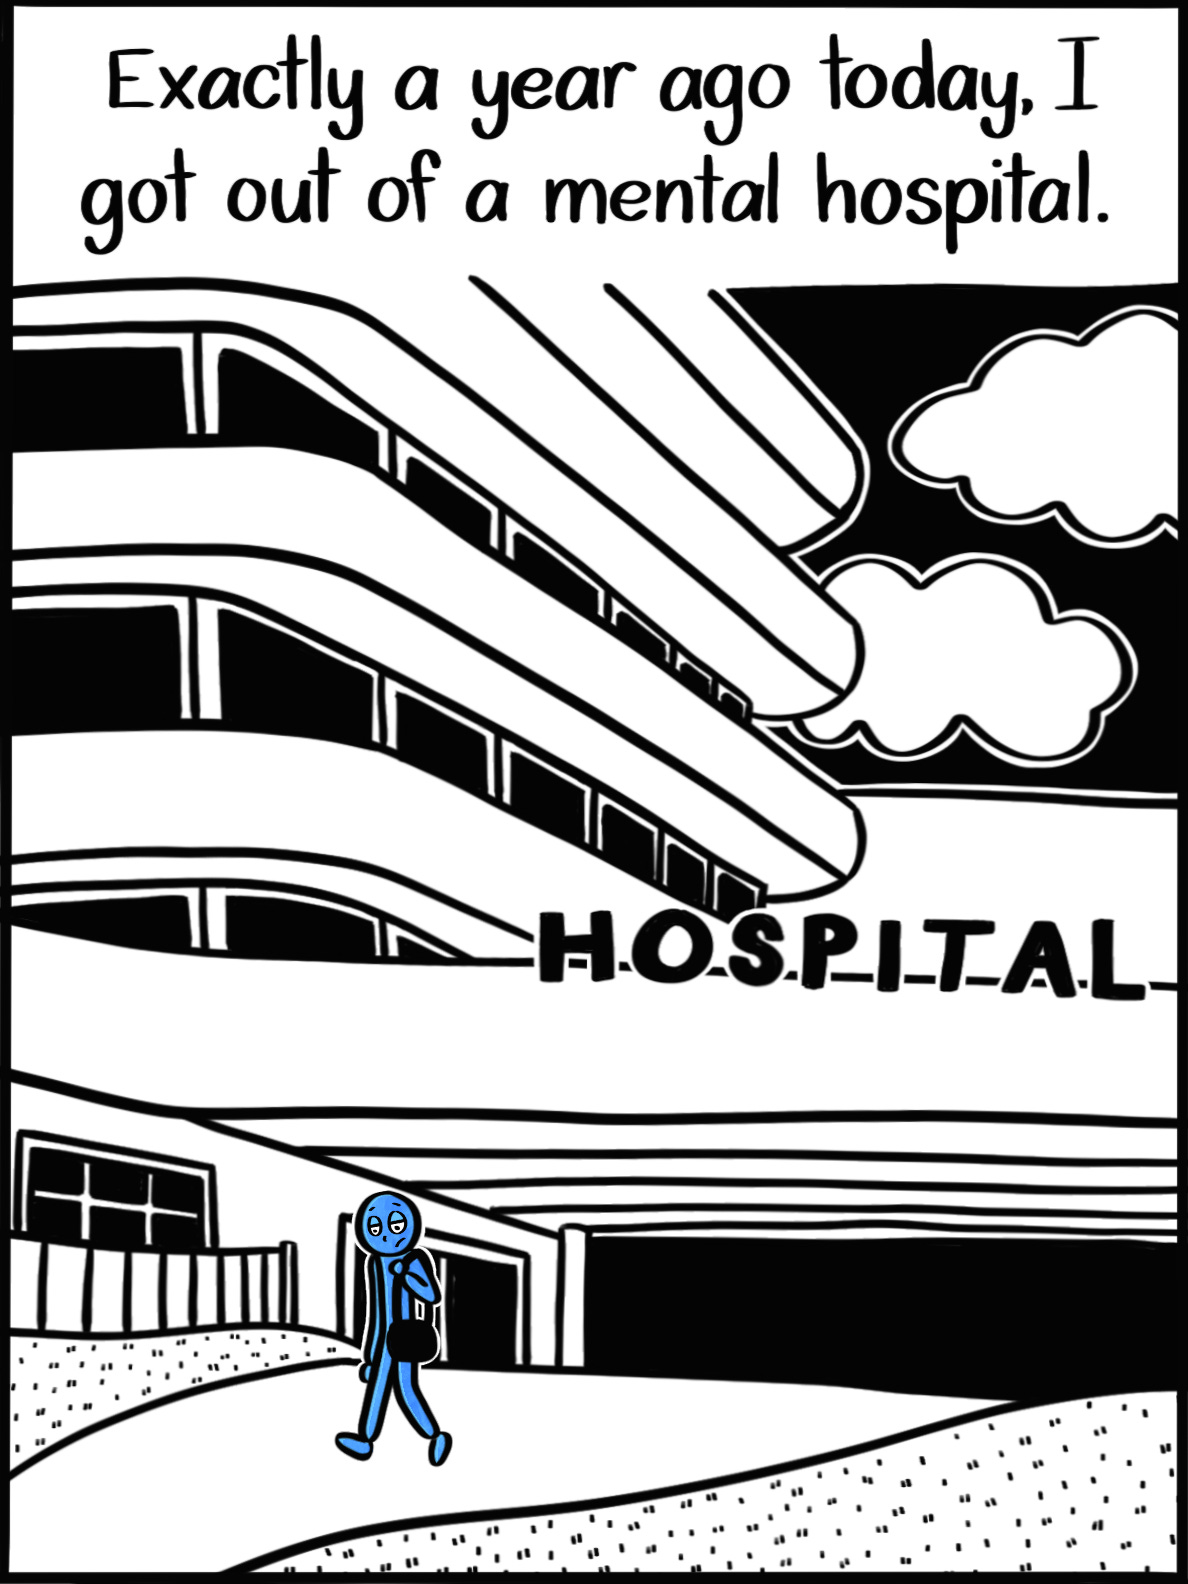 Caption: Exactly a year ago today, I got out of a mental hospital. Image: Wide image of a hospital. The Blue Person, small in comparison, walks out with their head hung low and a bag hanging off their shoulder.